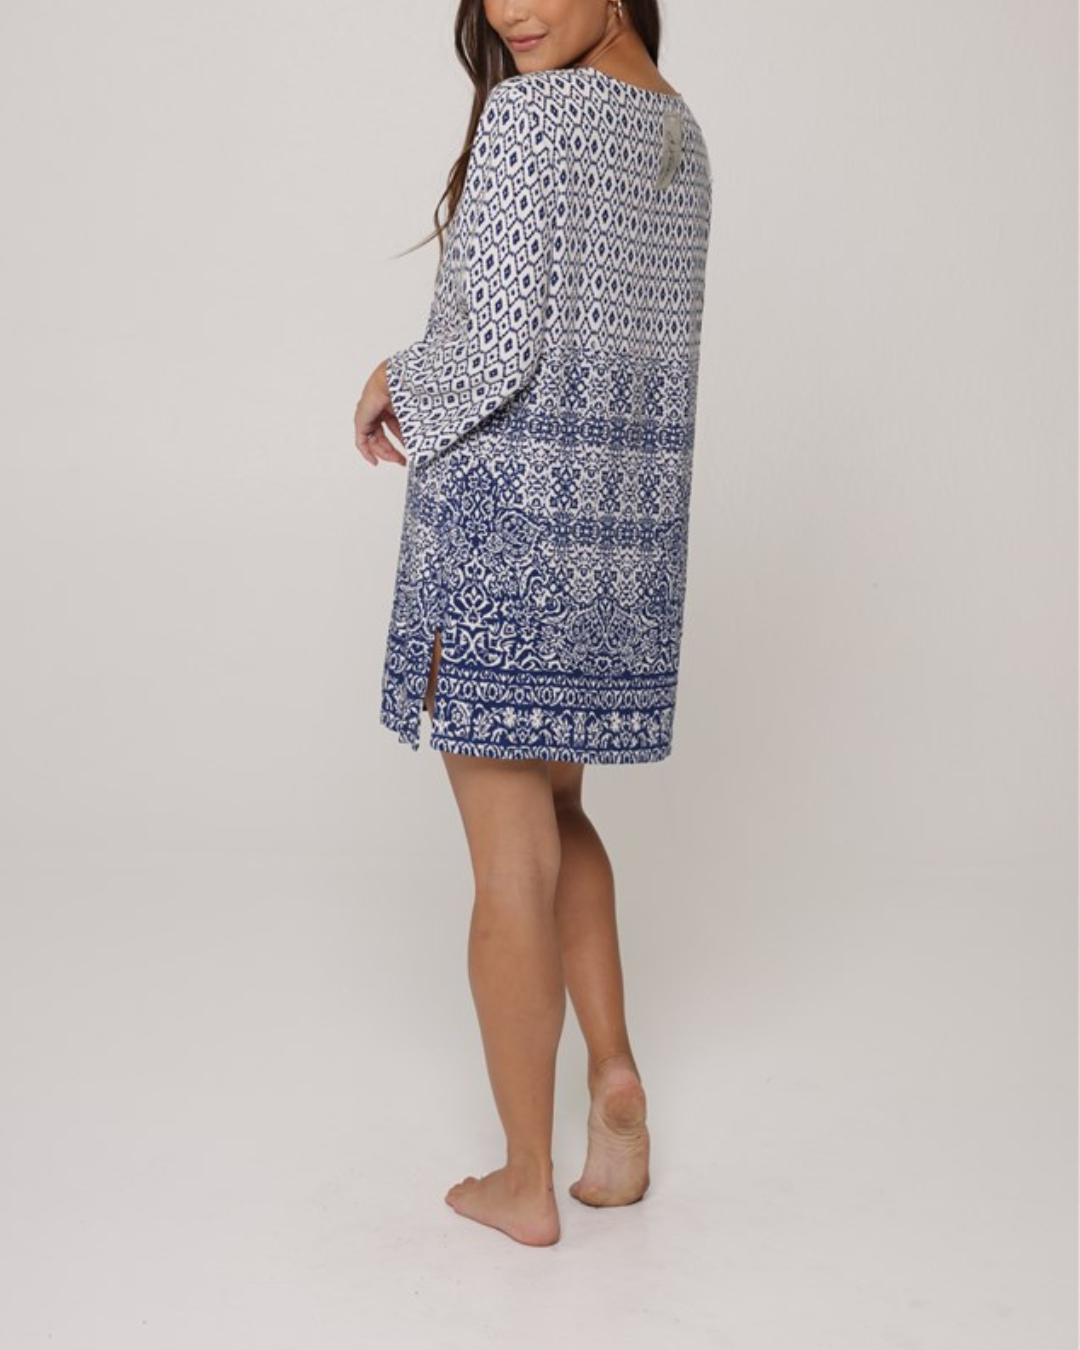 A model wearing a tunic dress in a navy and white ornate print